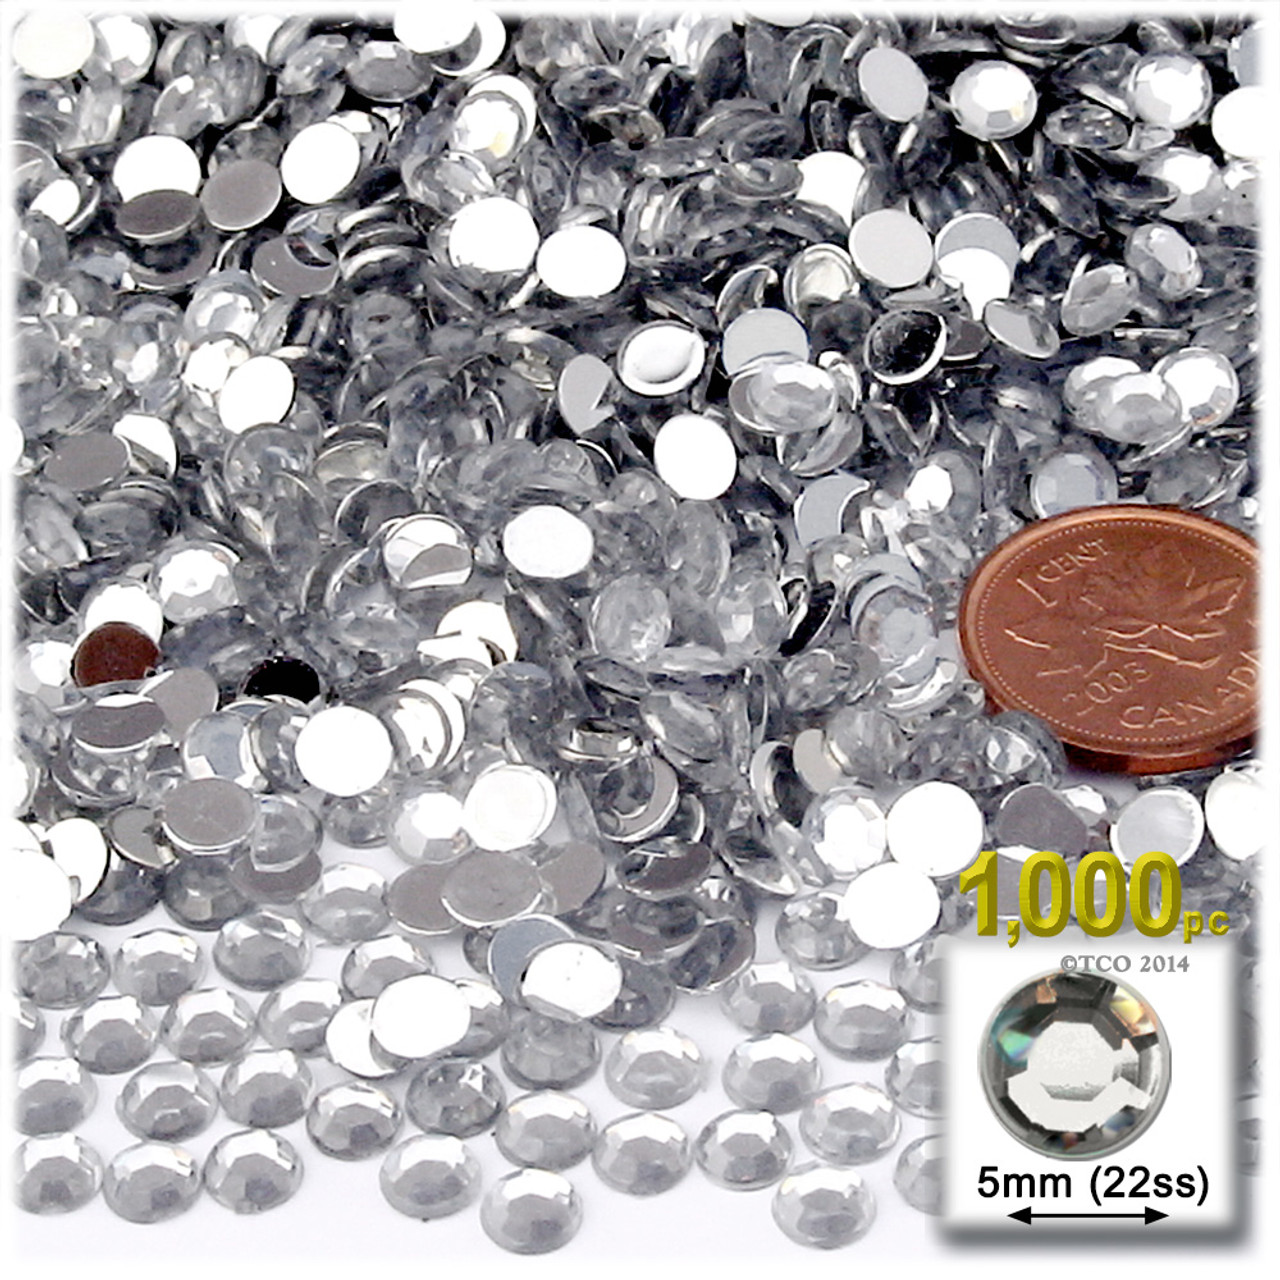 500pcs About 3/4/5mm Real White Flat Back Rhinestones For Crafts